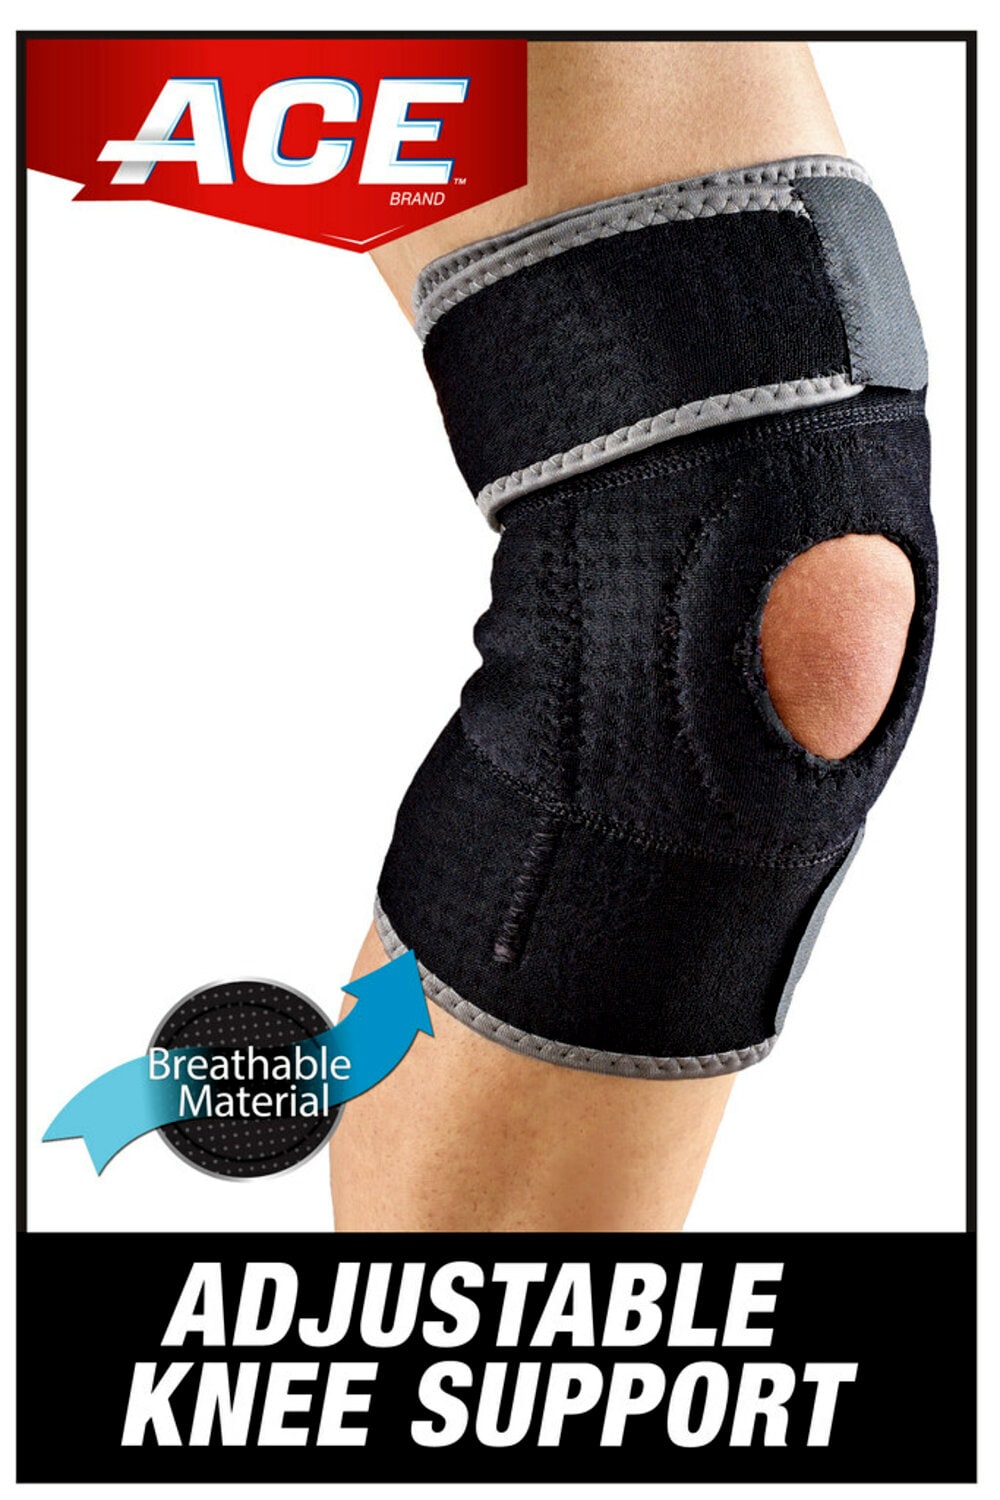 7100192358 - ACE Knee Support 207247, One Size Adjustable